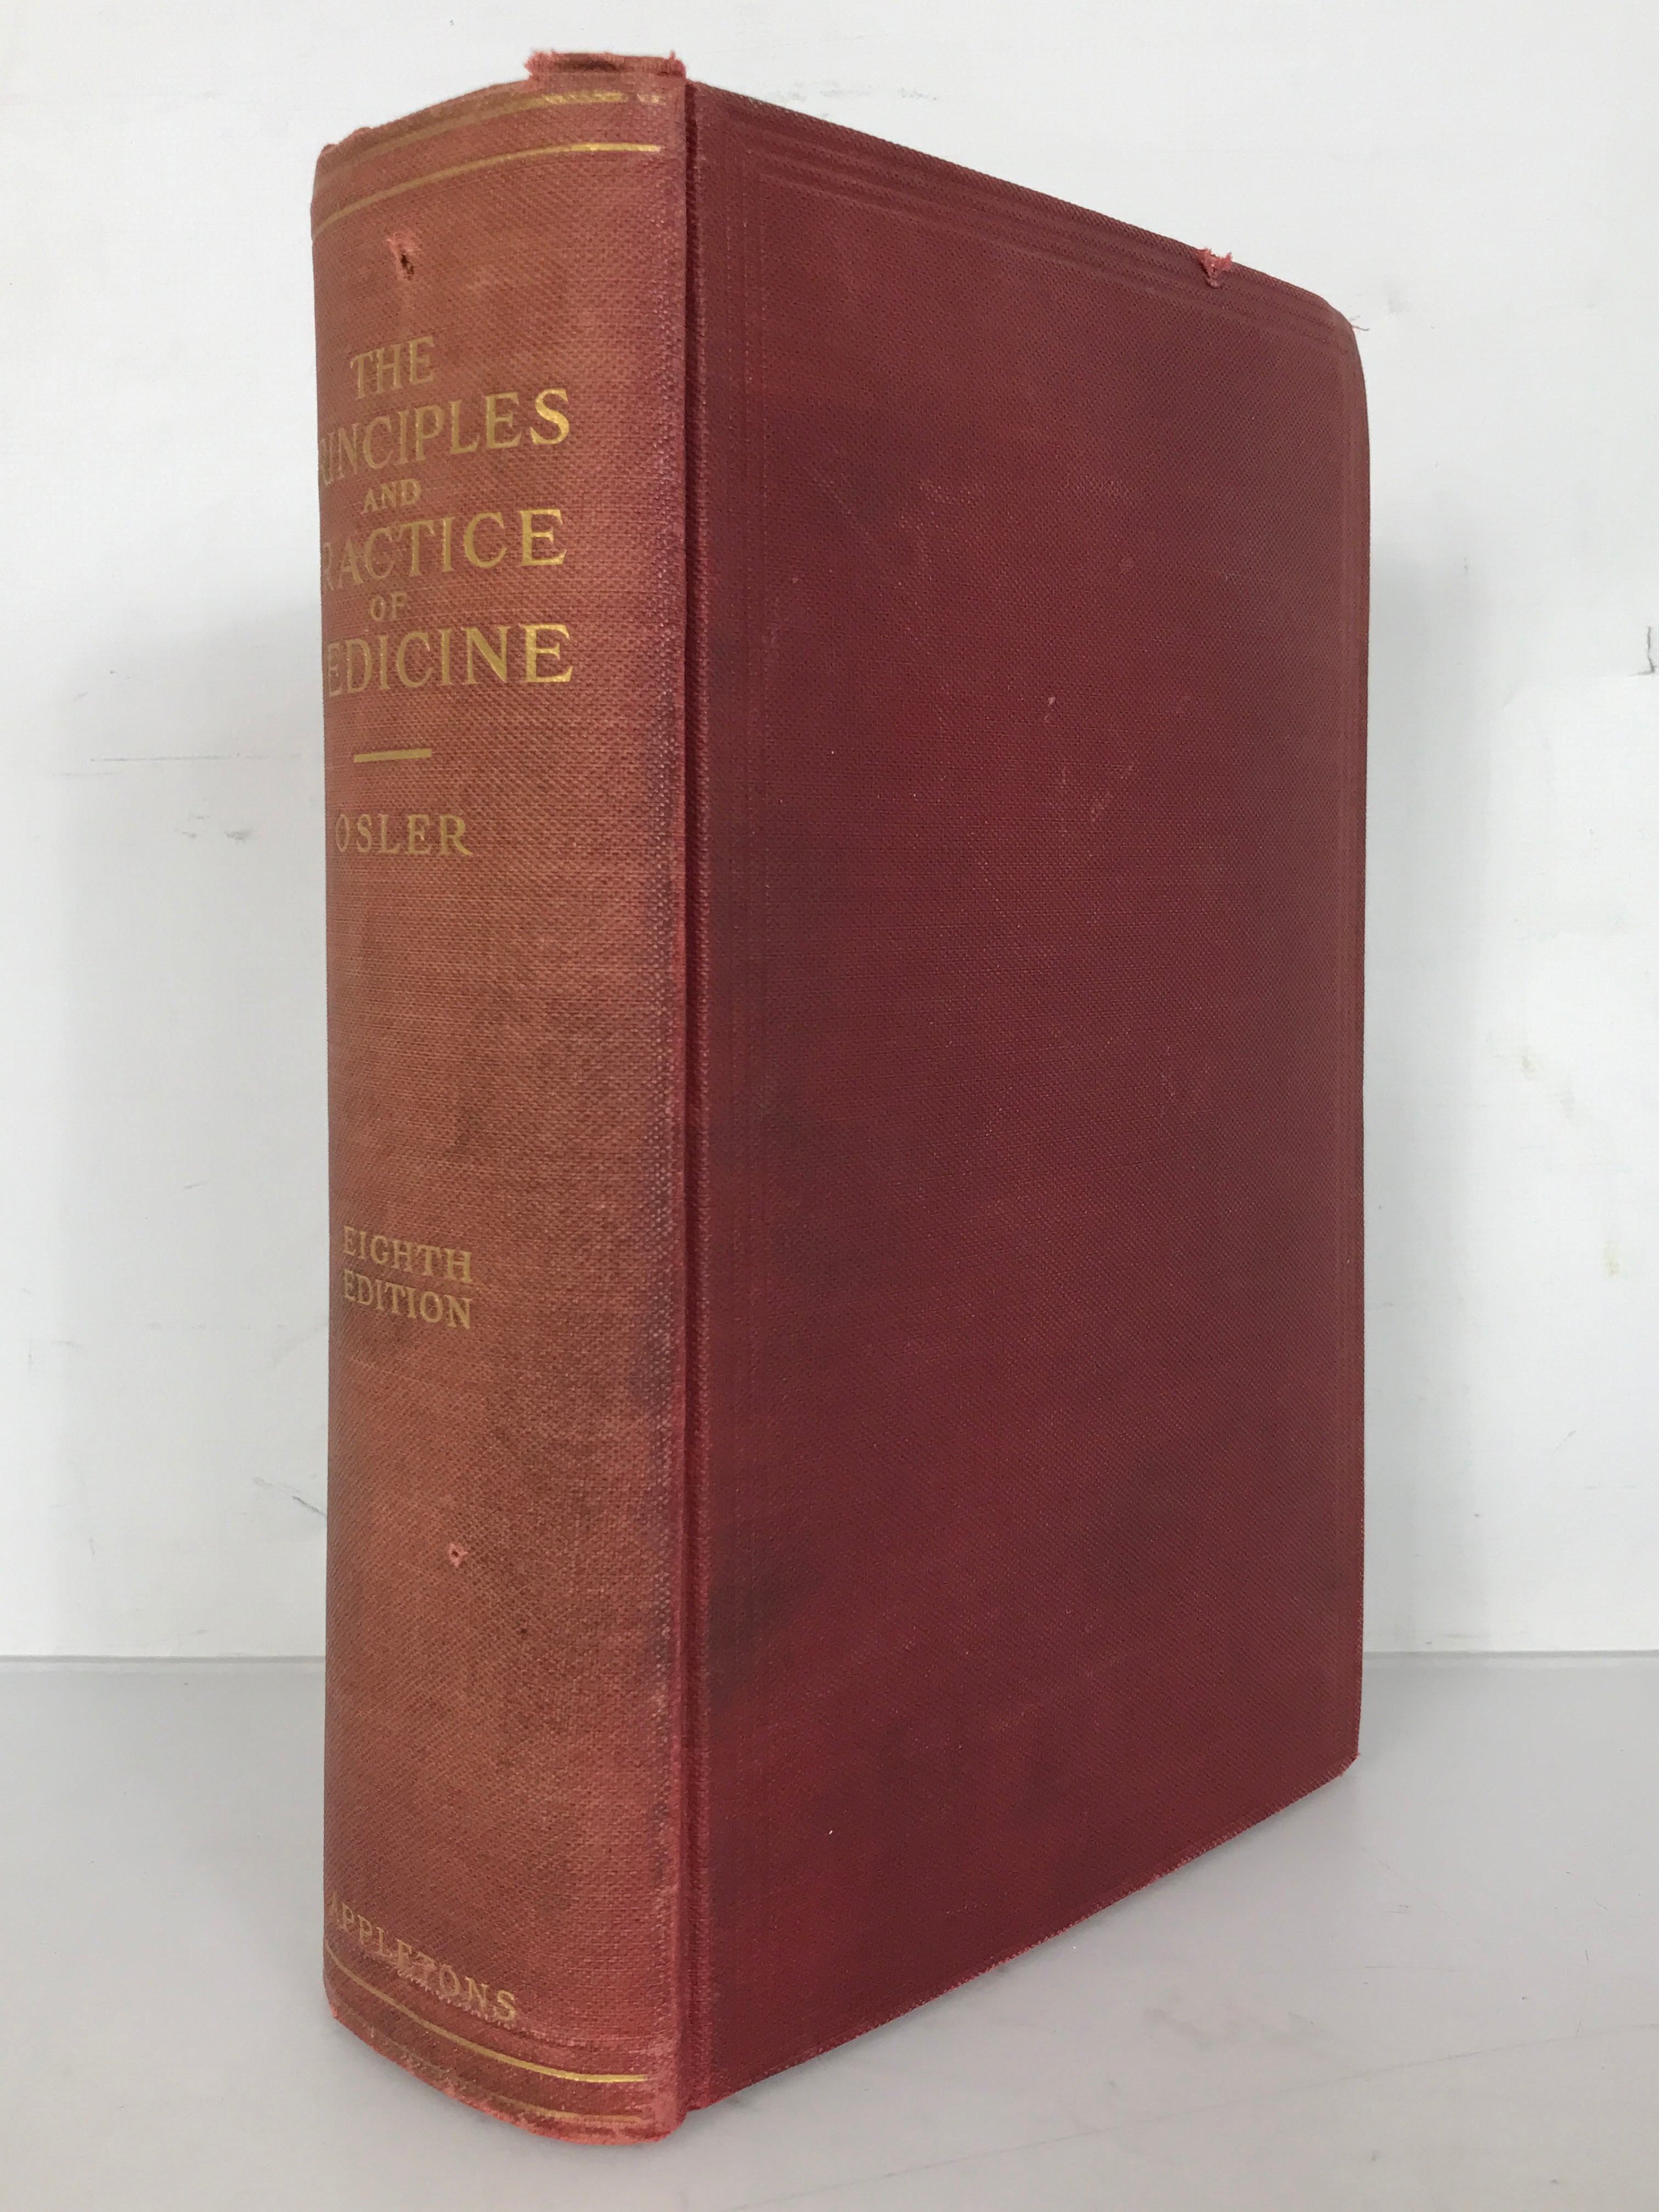 The Principles and Practice of Medicine by Sir William Osler 1912 HC